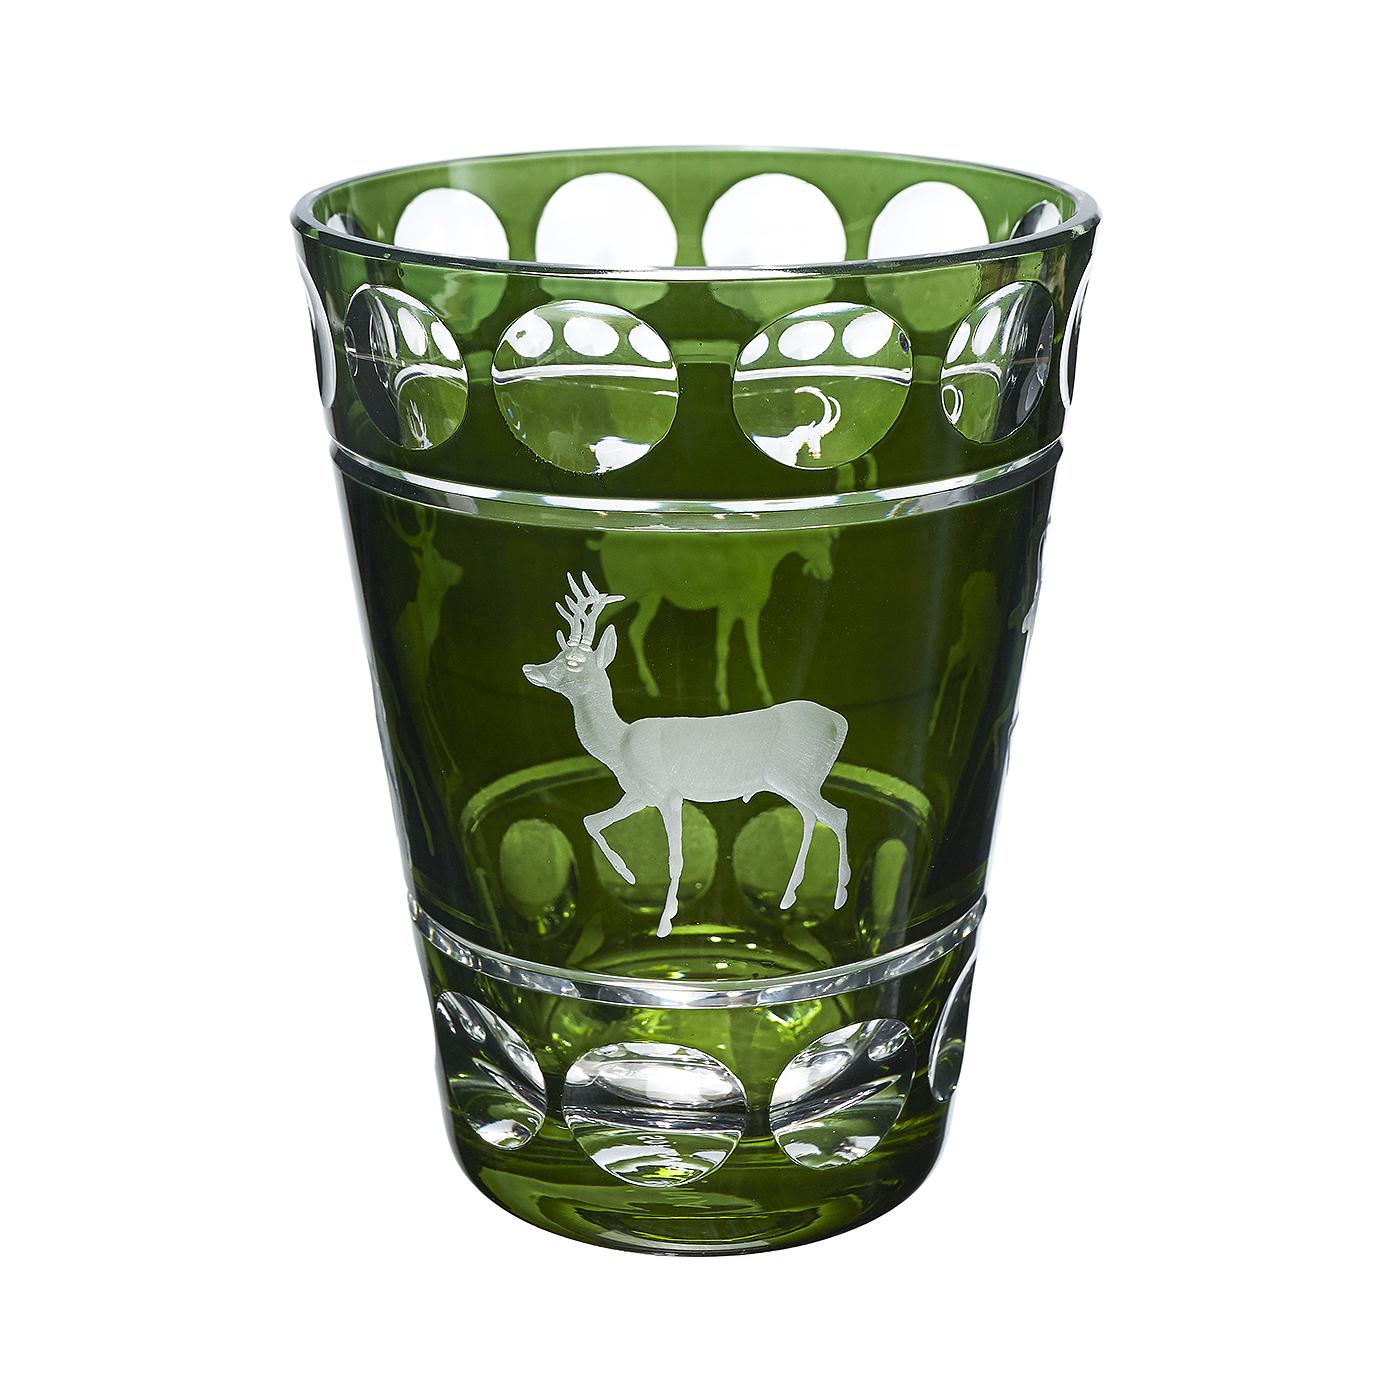 Handblown crystal vase in green glass with hand-edged hunting scene in the style of black forest. The decor is ahunting decor with four hand-engraved animals in naturalistic style. Completely handblown and hand-engraved in Bavaria Germany. The glass